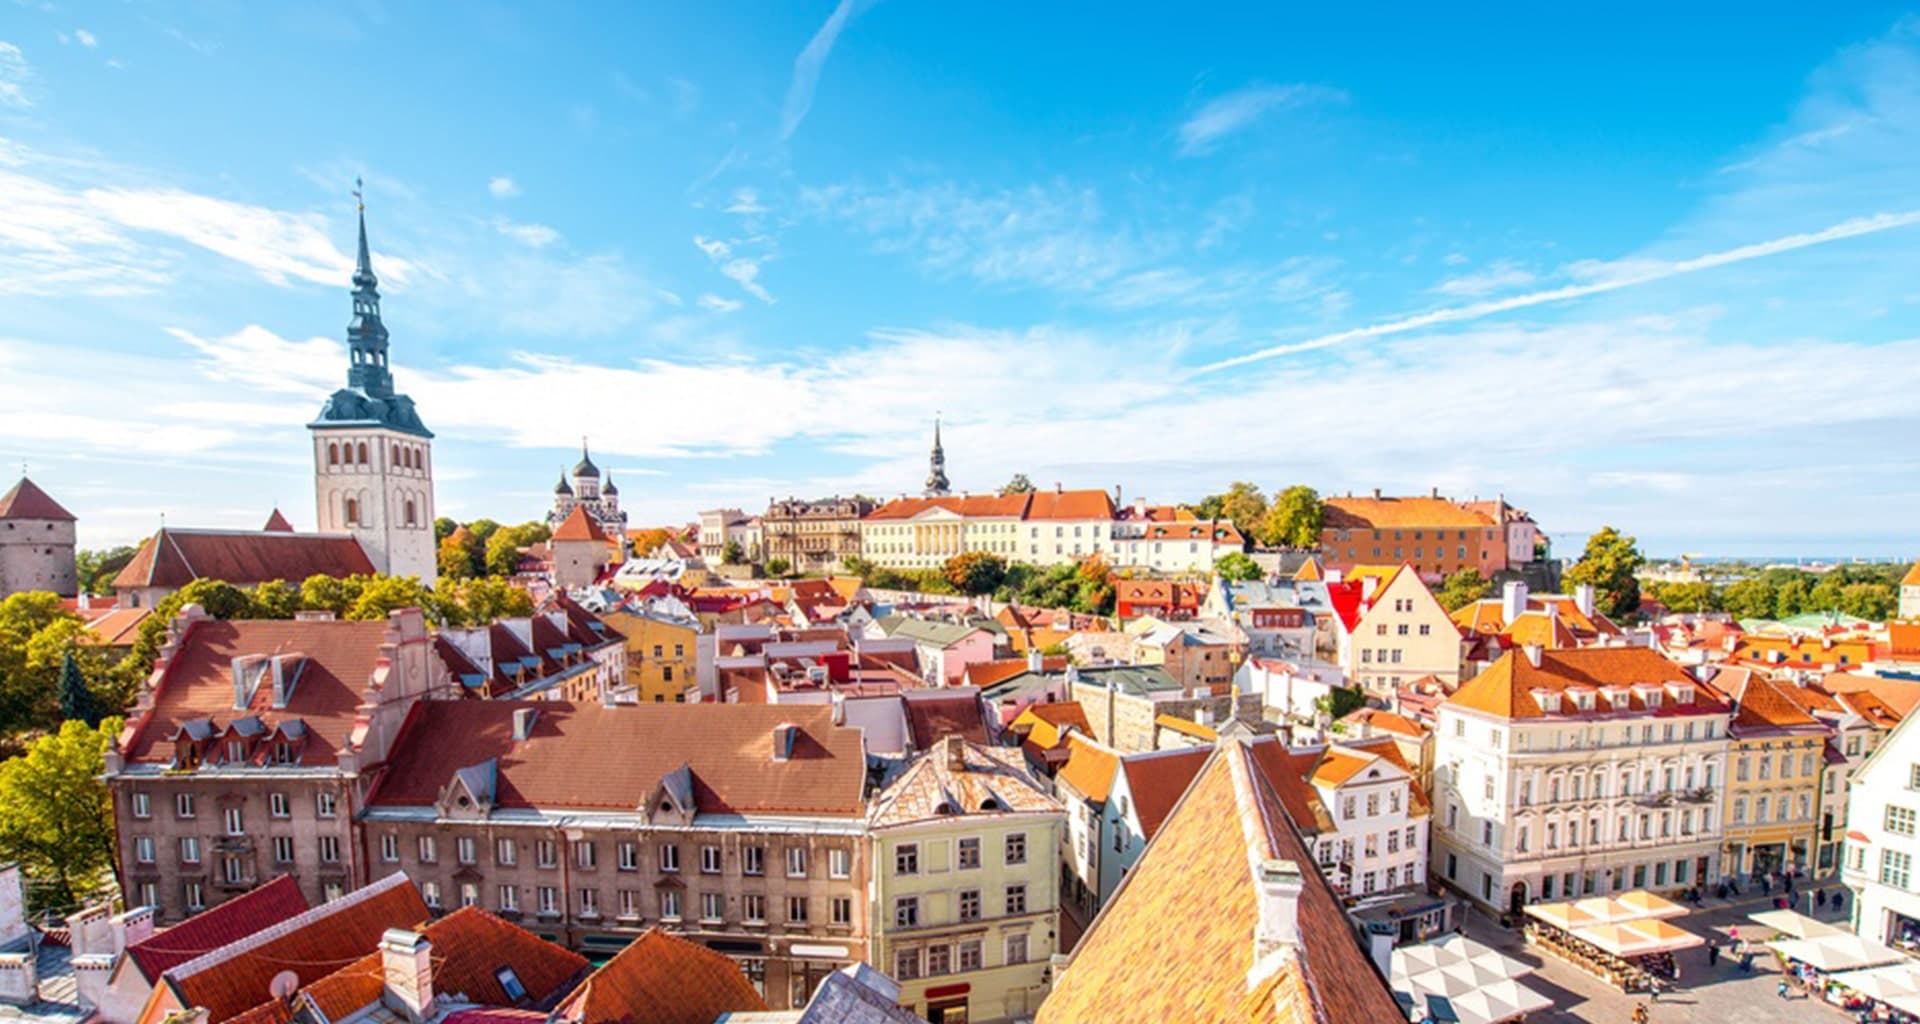 Up to 55% OFF your Baltic Sea crossings